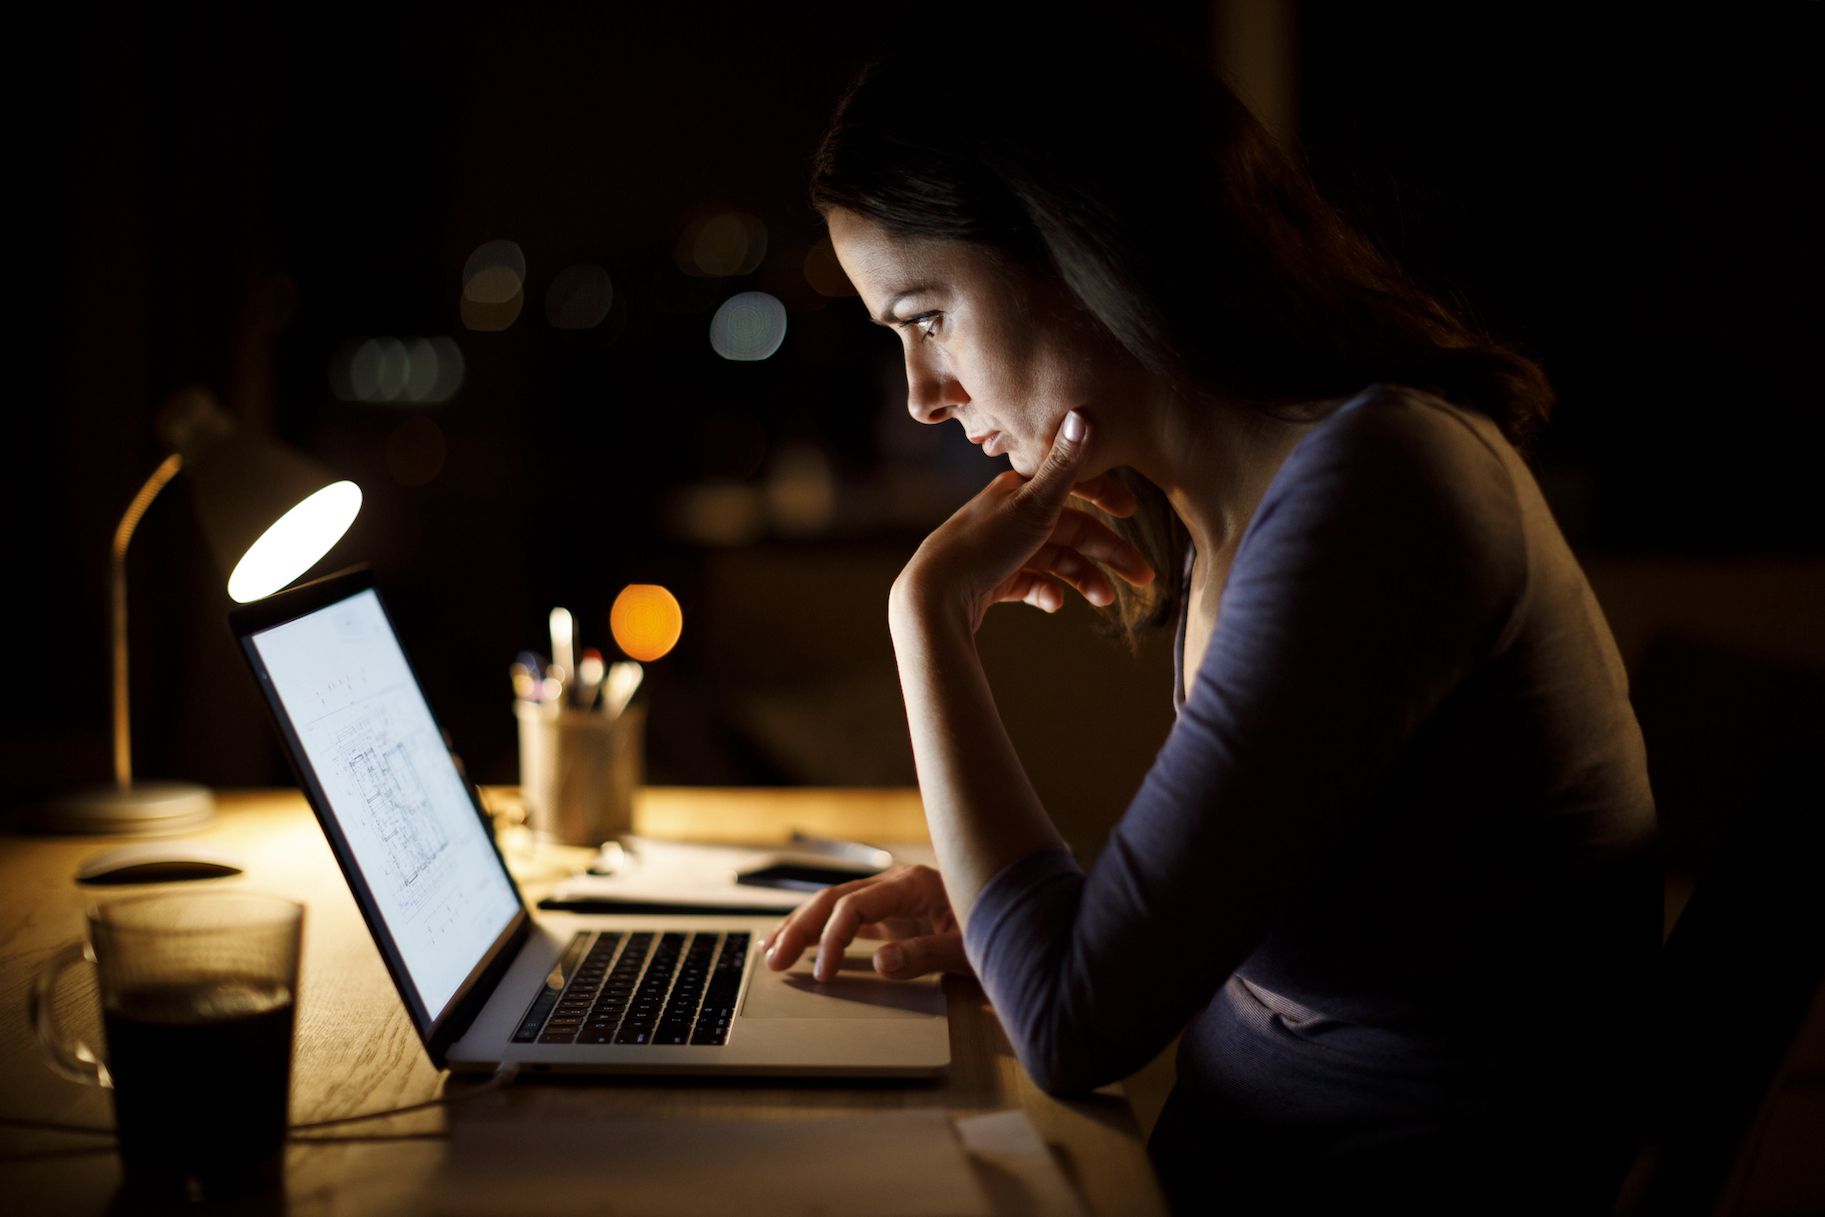 Woman Working Late At Home for article on toxic workplace.